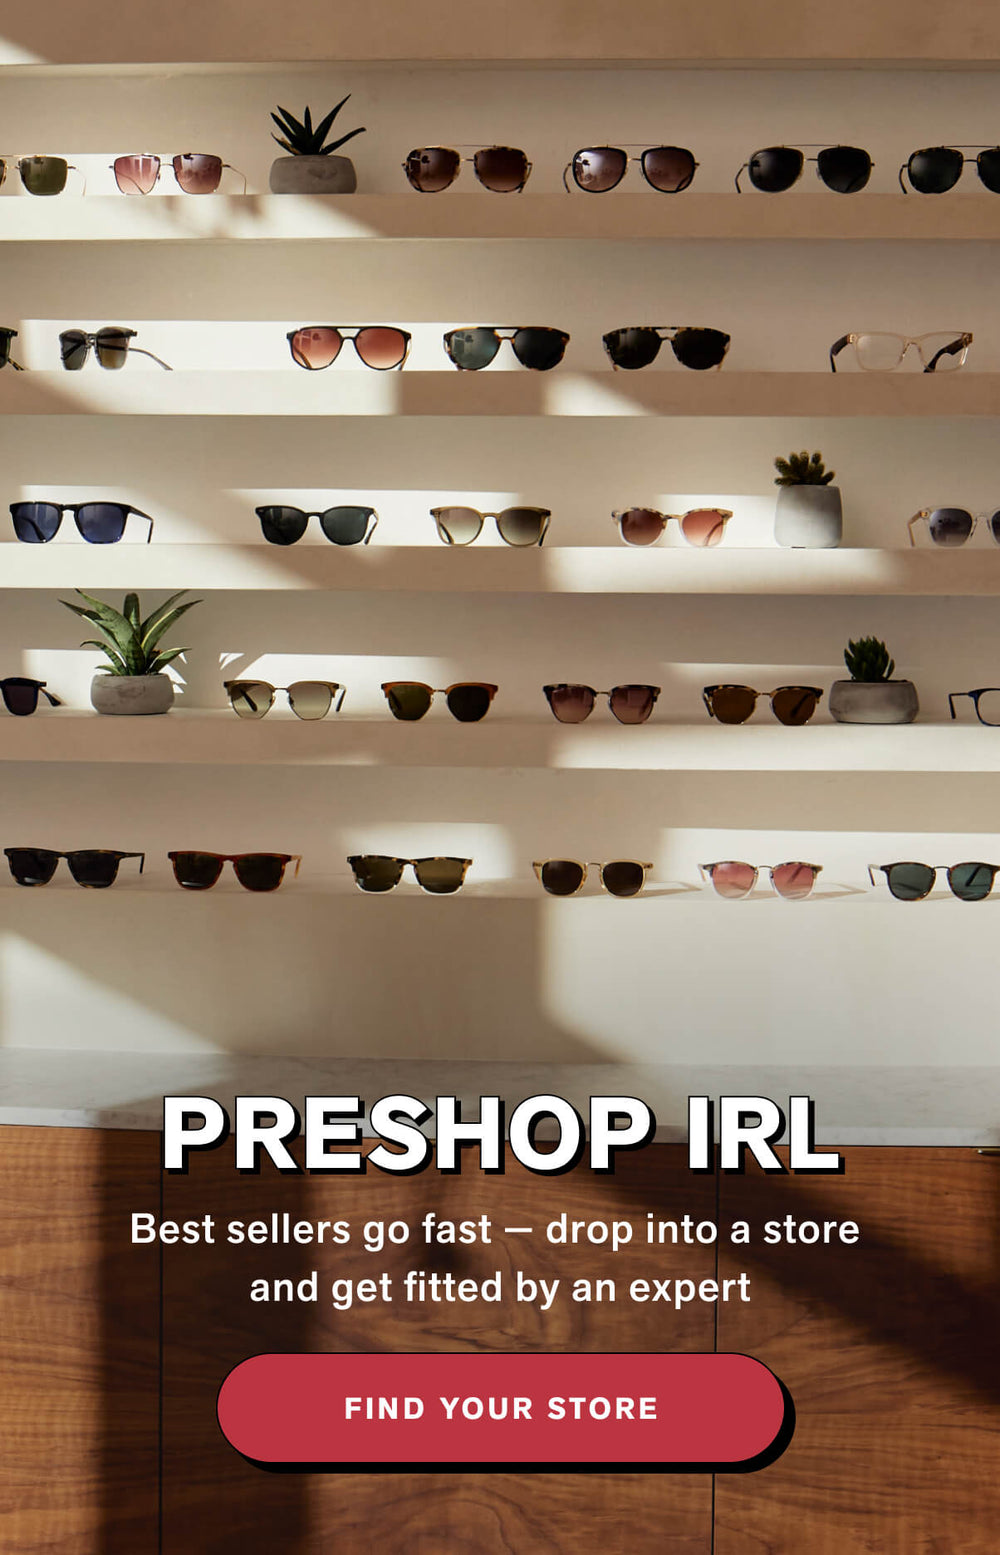 PRESHOP IRL  Best sellers go fast — drop into a store and get fitted by an expert  FIND YOUR STORE